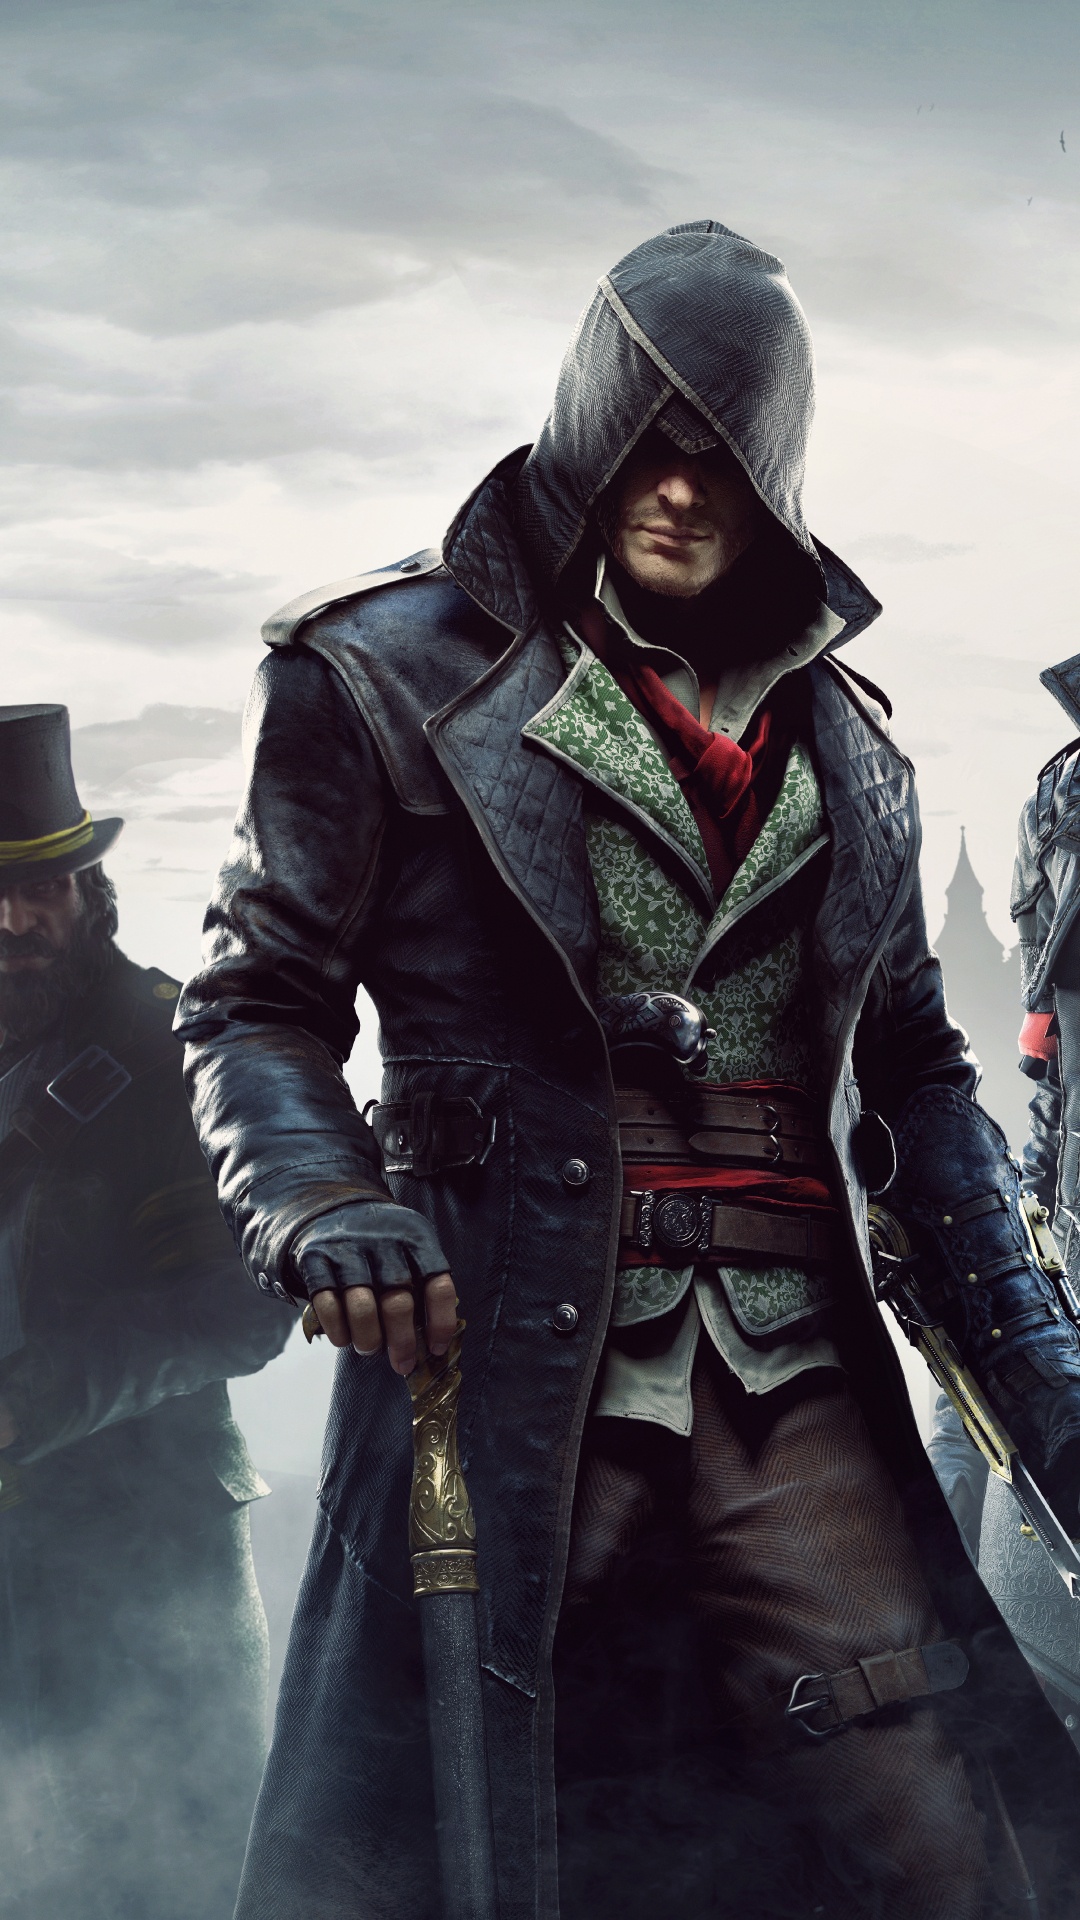 Assassins Creed Syndicate, Ubisoft, Pc-Spiel, Film, Assassins Creed Unity. Wallpaper in 1080x1920 Resolution